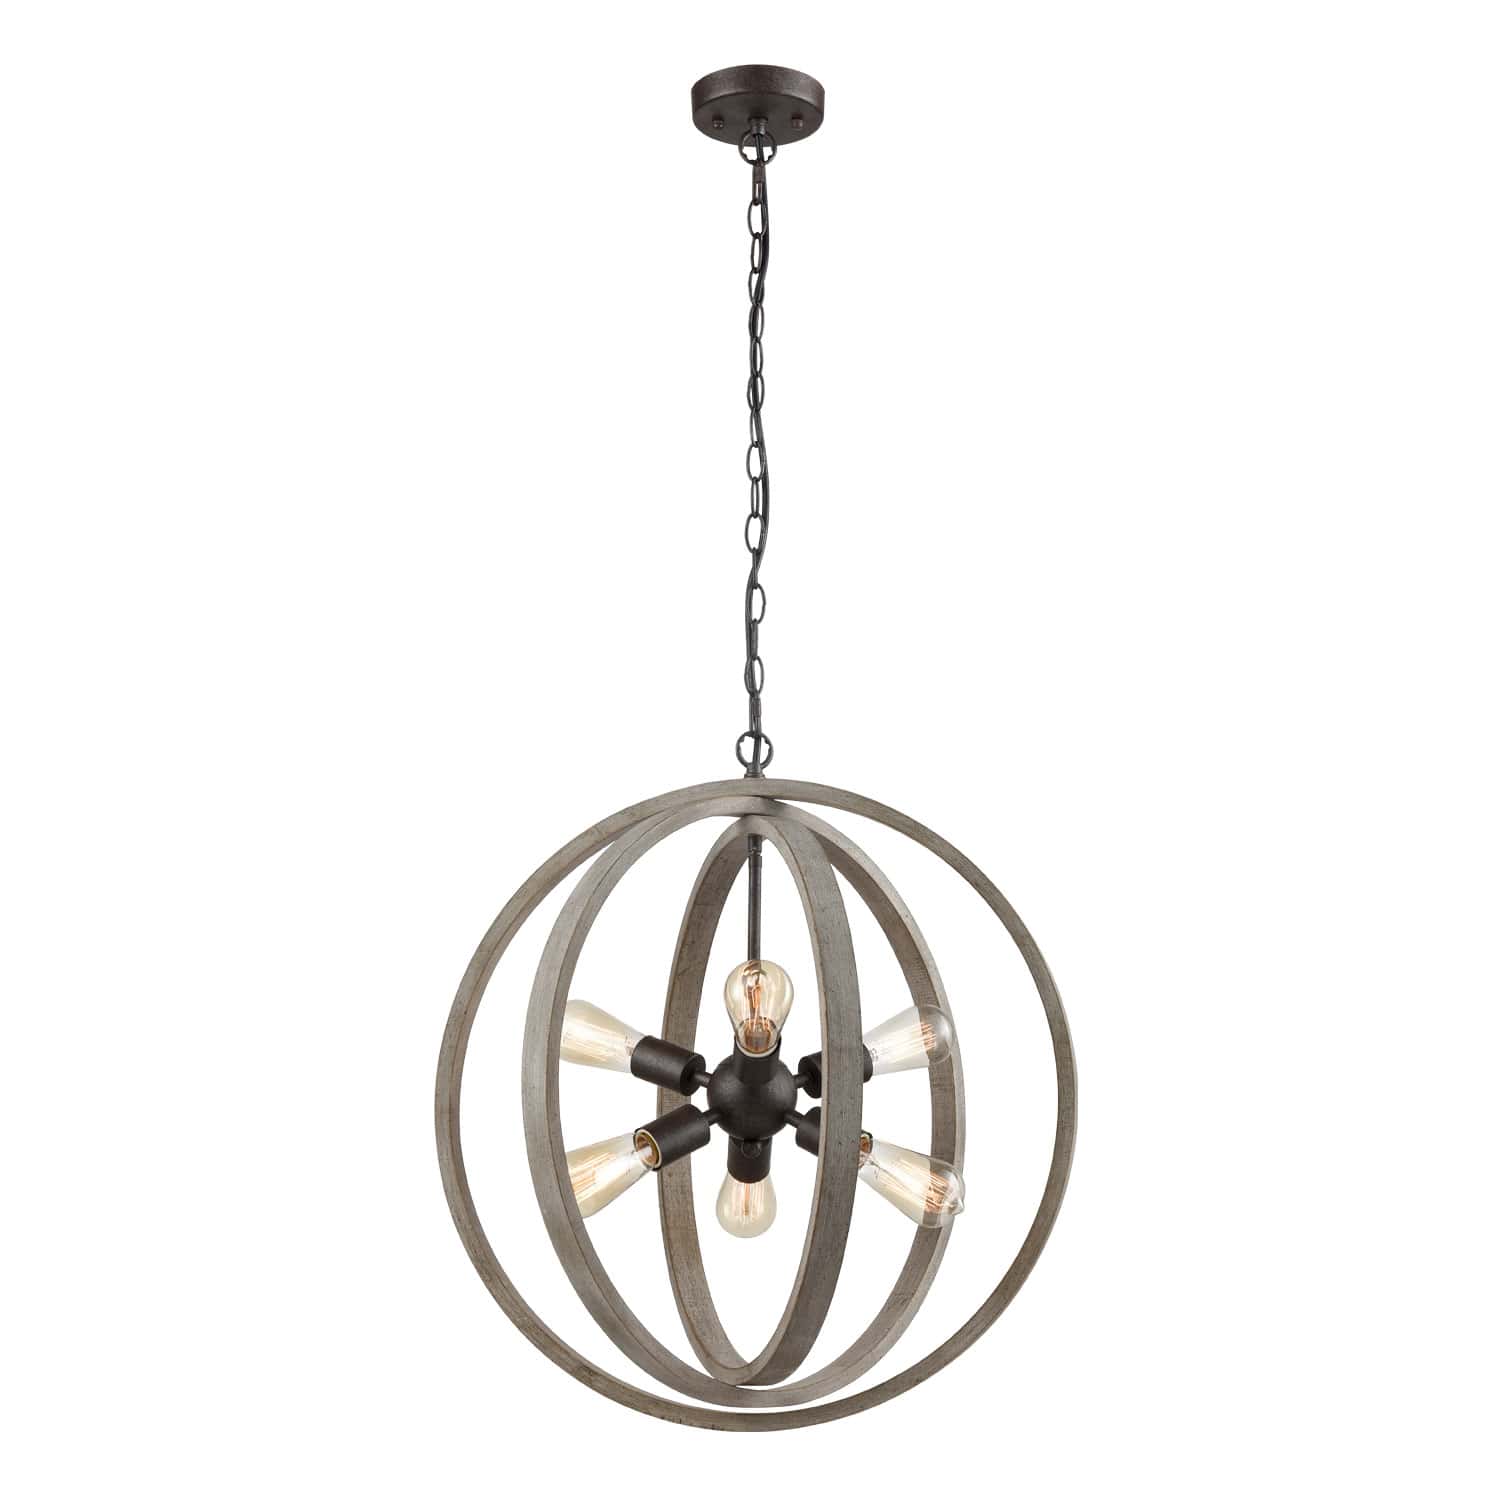 Rustic Pendant Chandelier with Globe Wood Shade - 6 Light